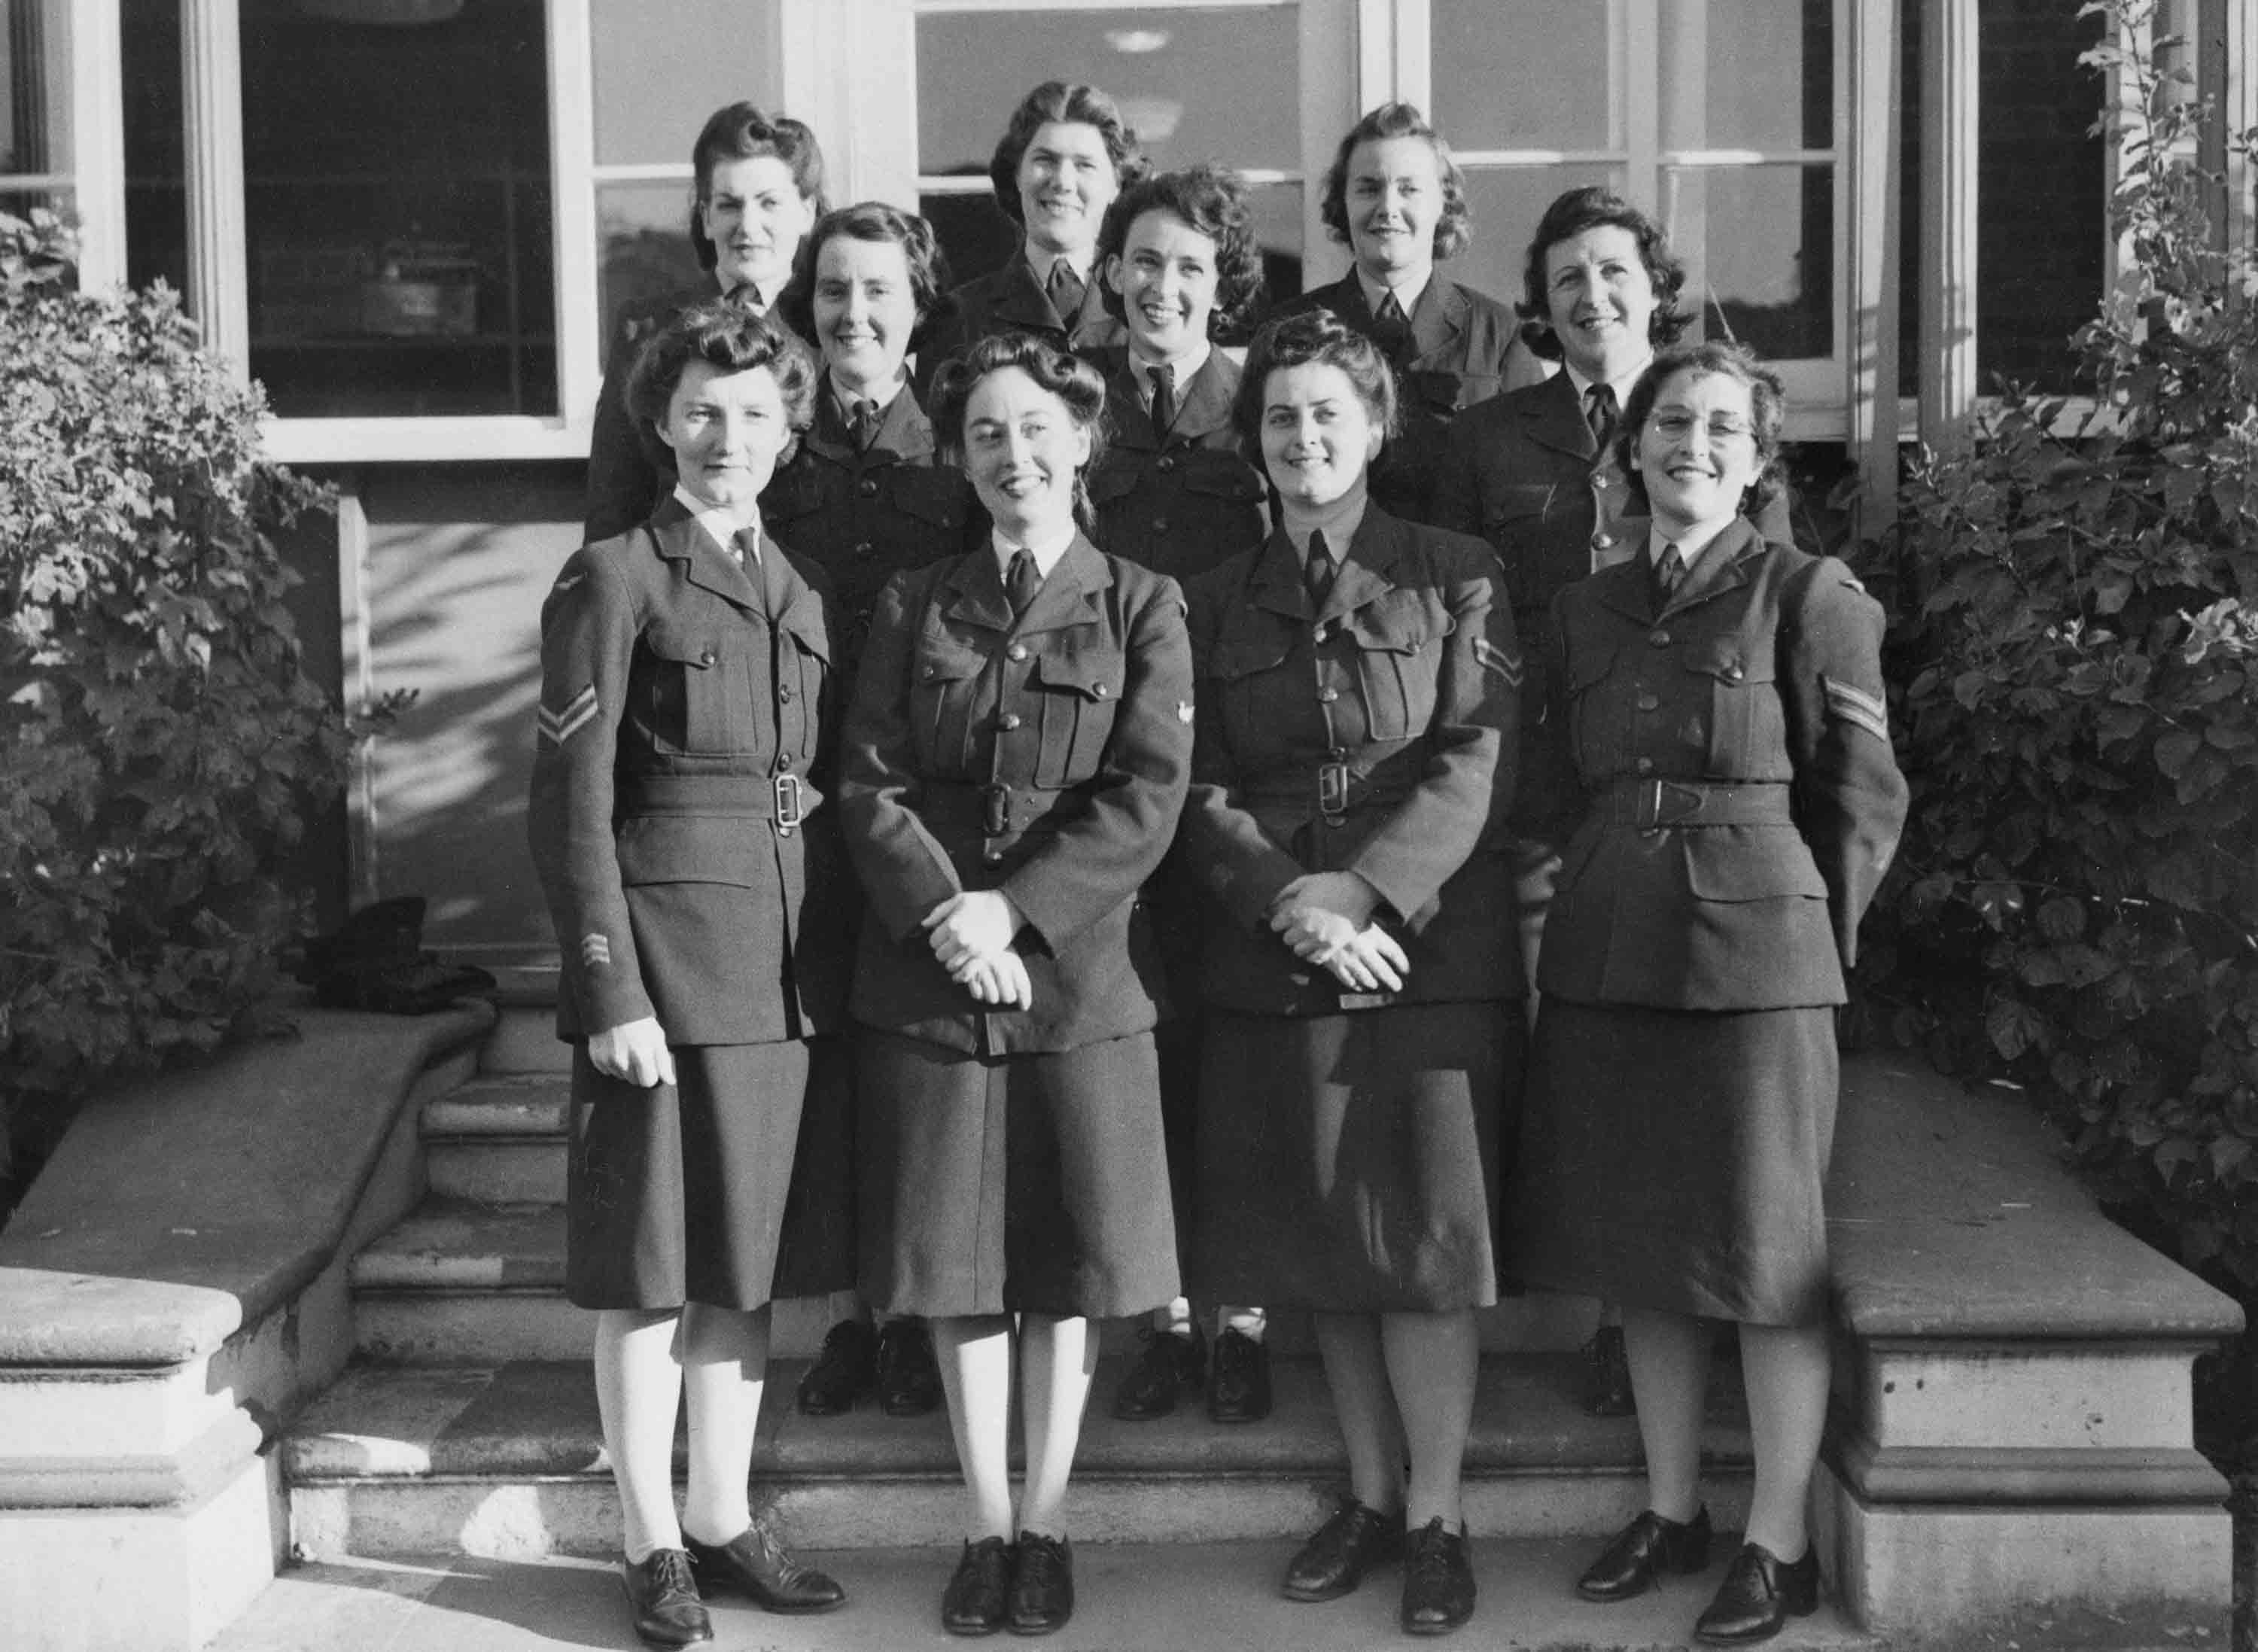 Ten women in uniform standing in three rows on a set of stairs in front of a building.